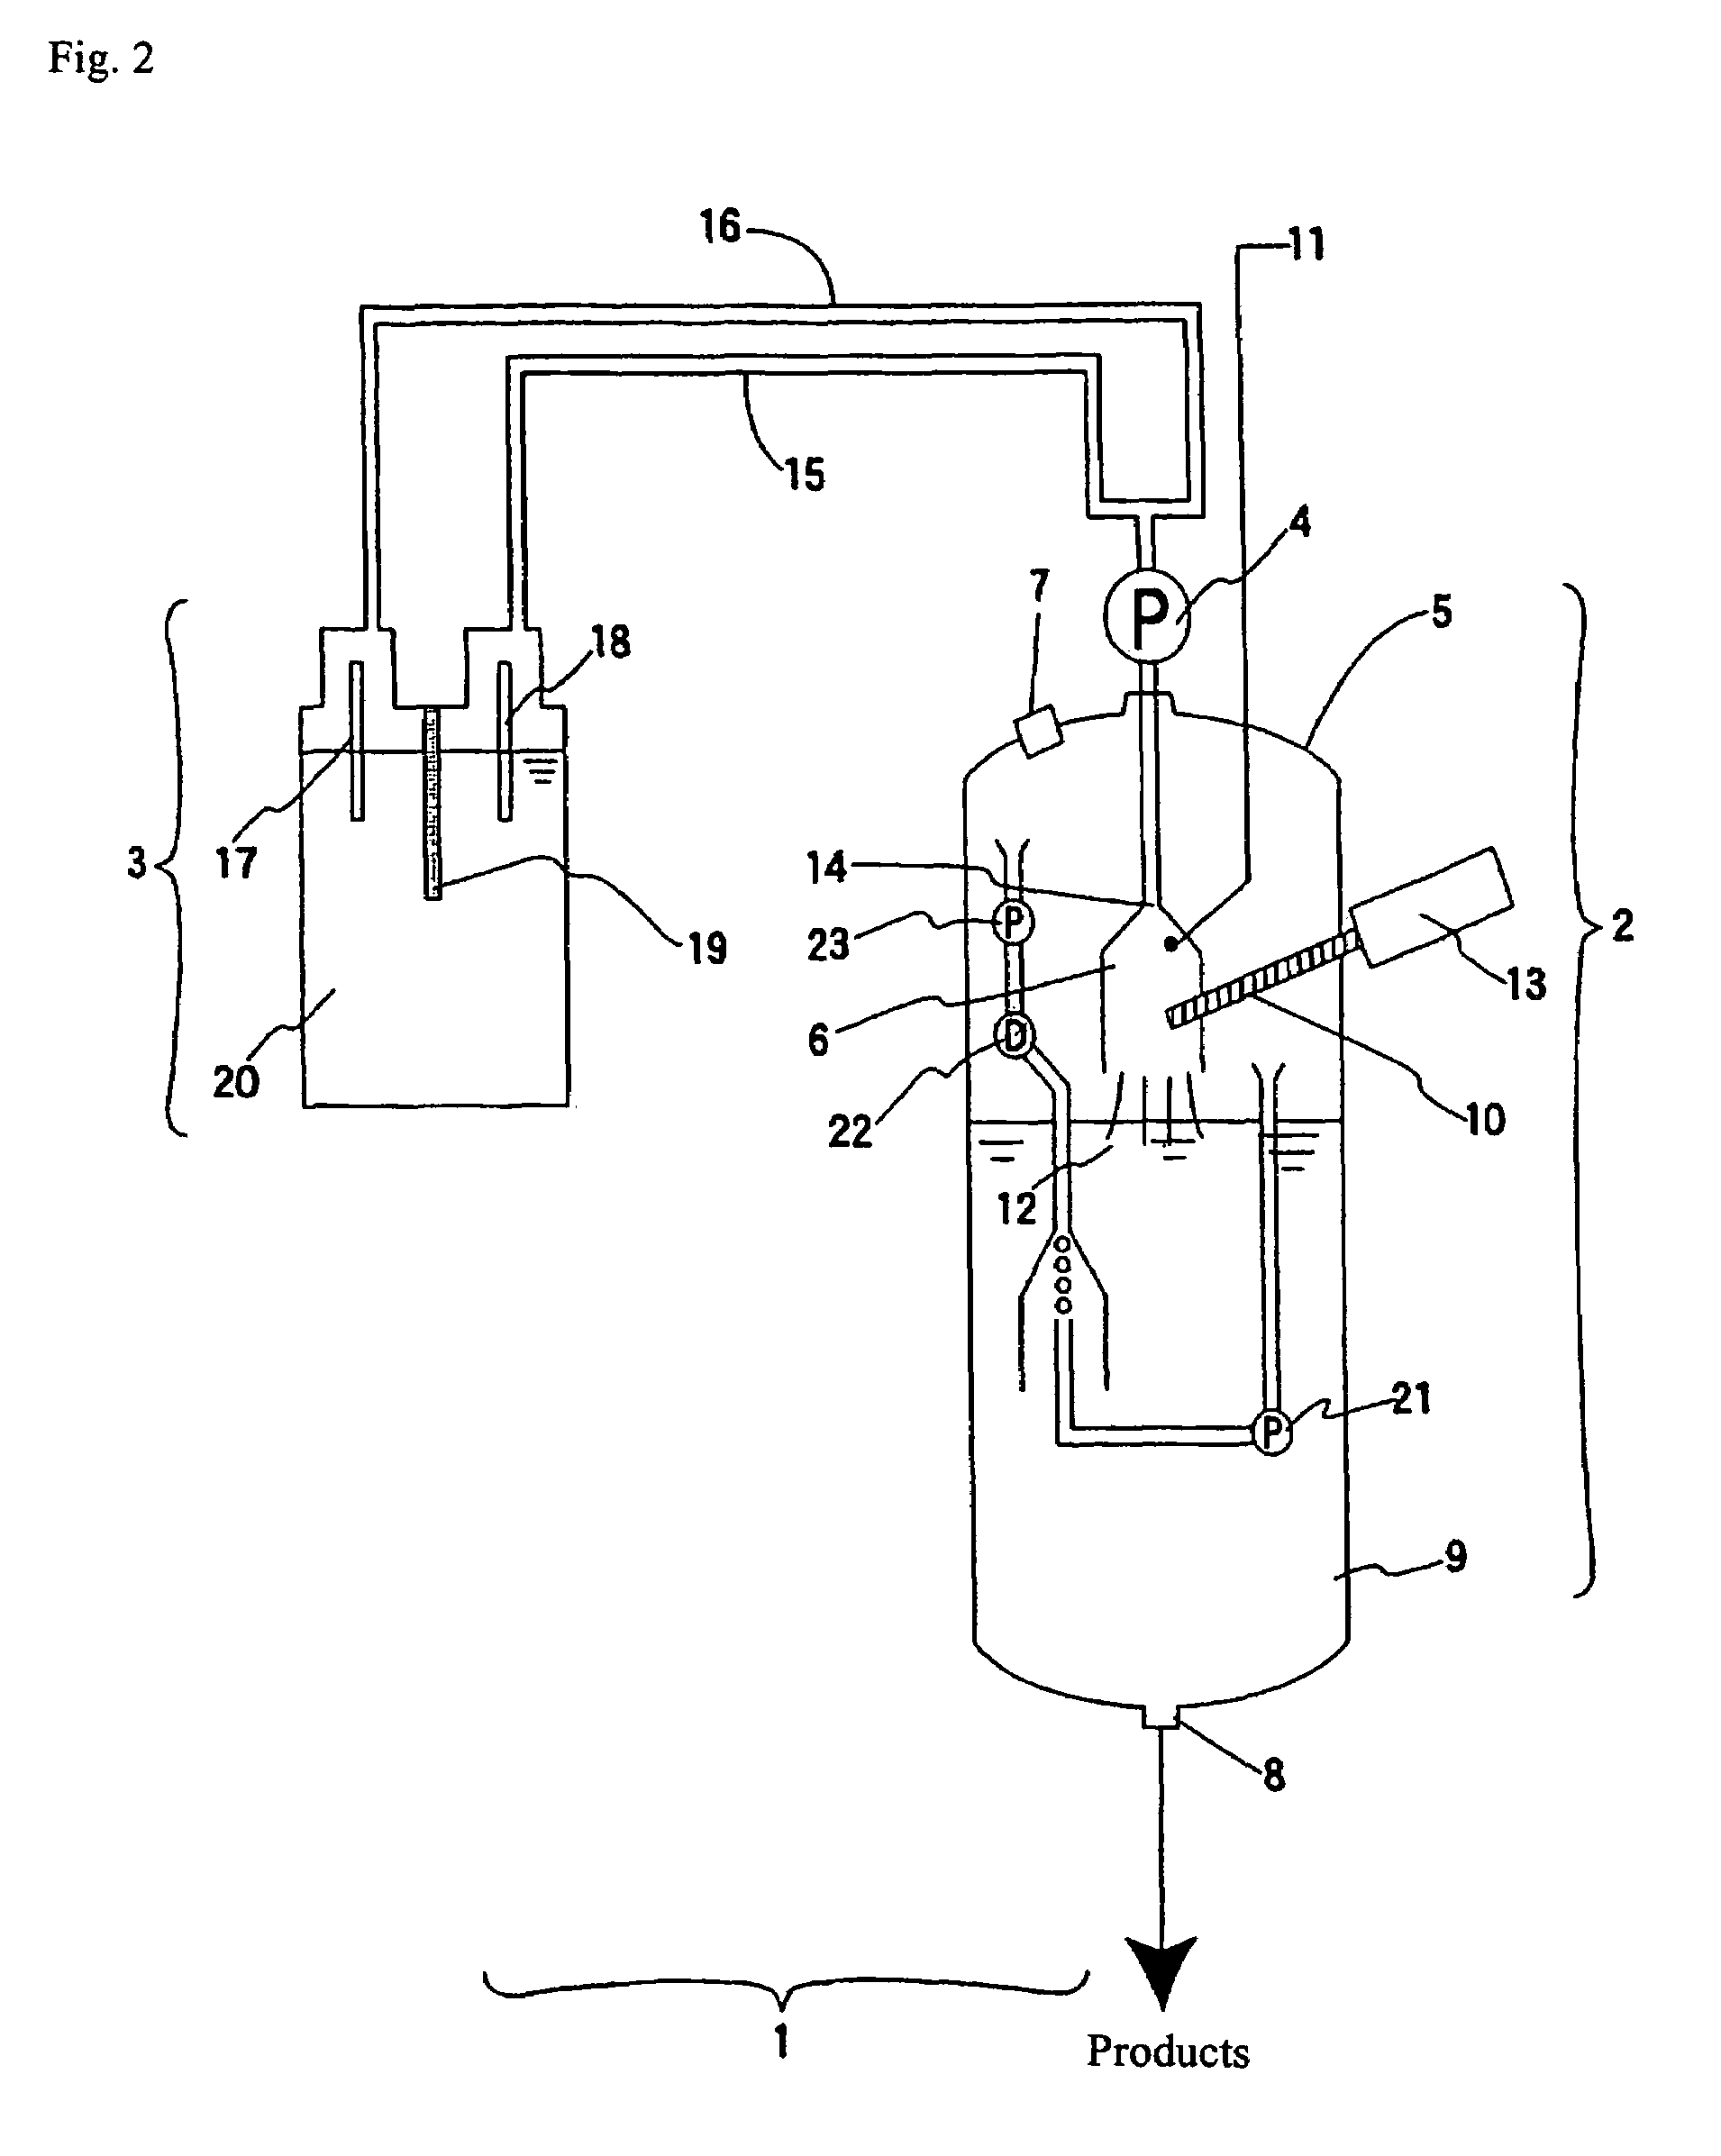 Method and device for manufacturing metallic particulates, and manufactured metallic particulates